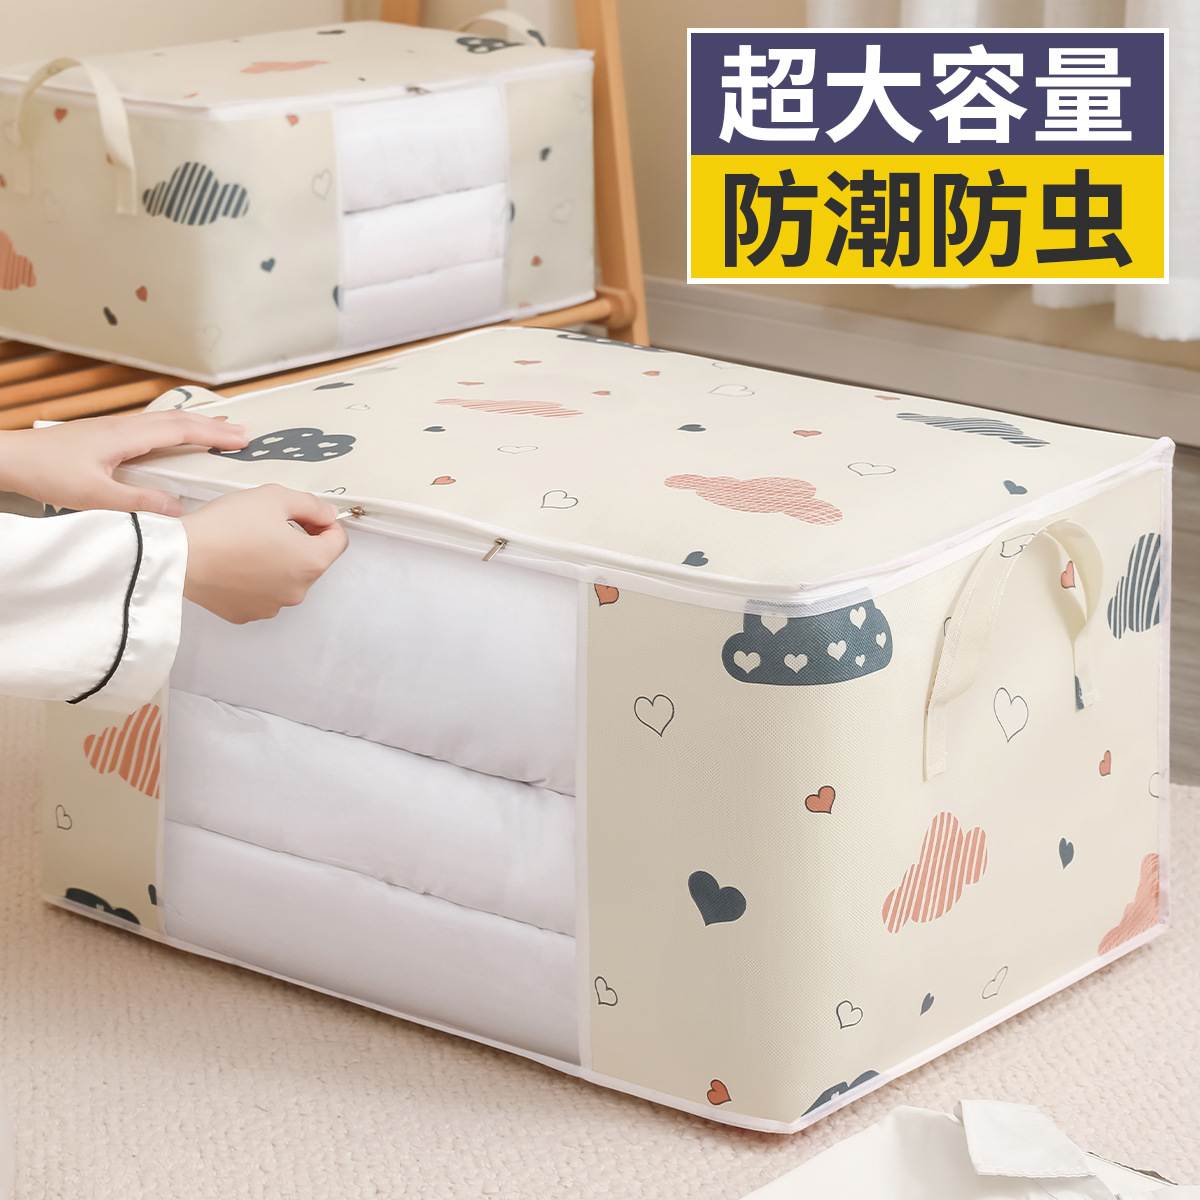 Quilt Buggy Bag with Handle Quilt Bag Multi-Functional Dustproof Bag Household Moving Packing Bag Organizing Folders Storage Box